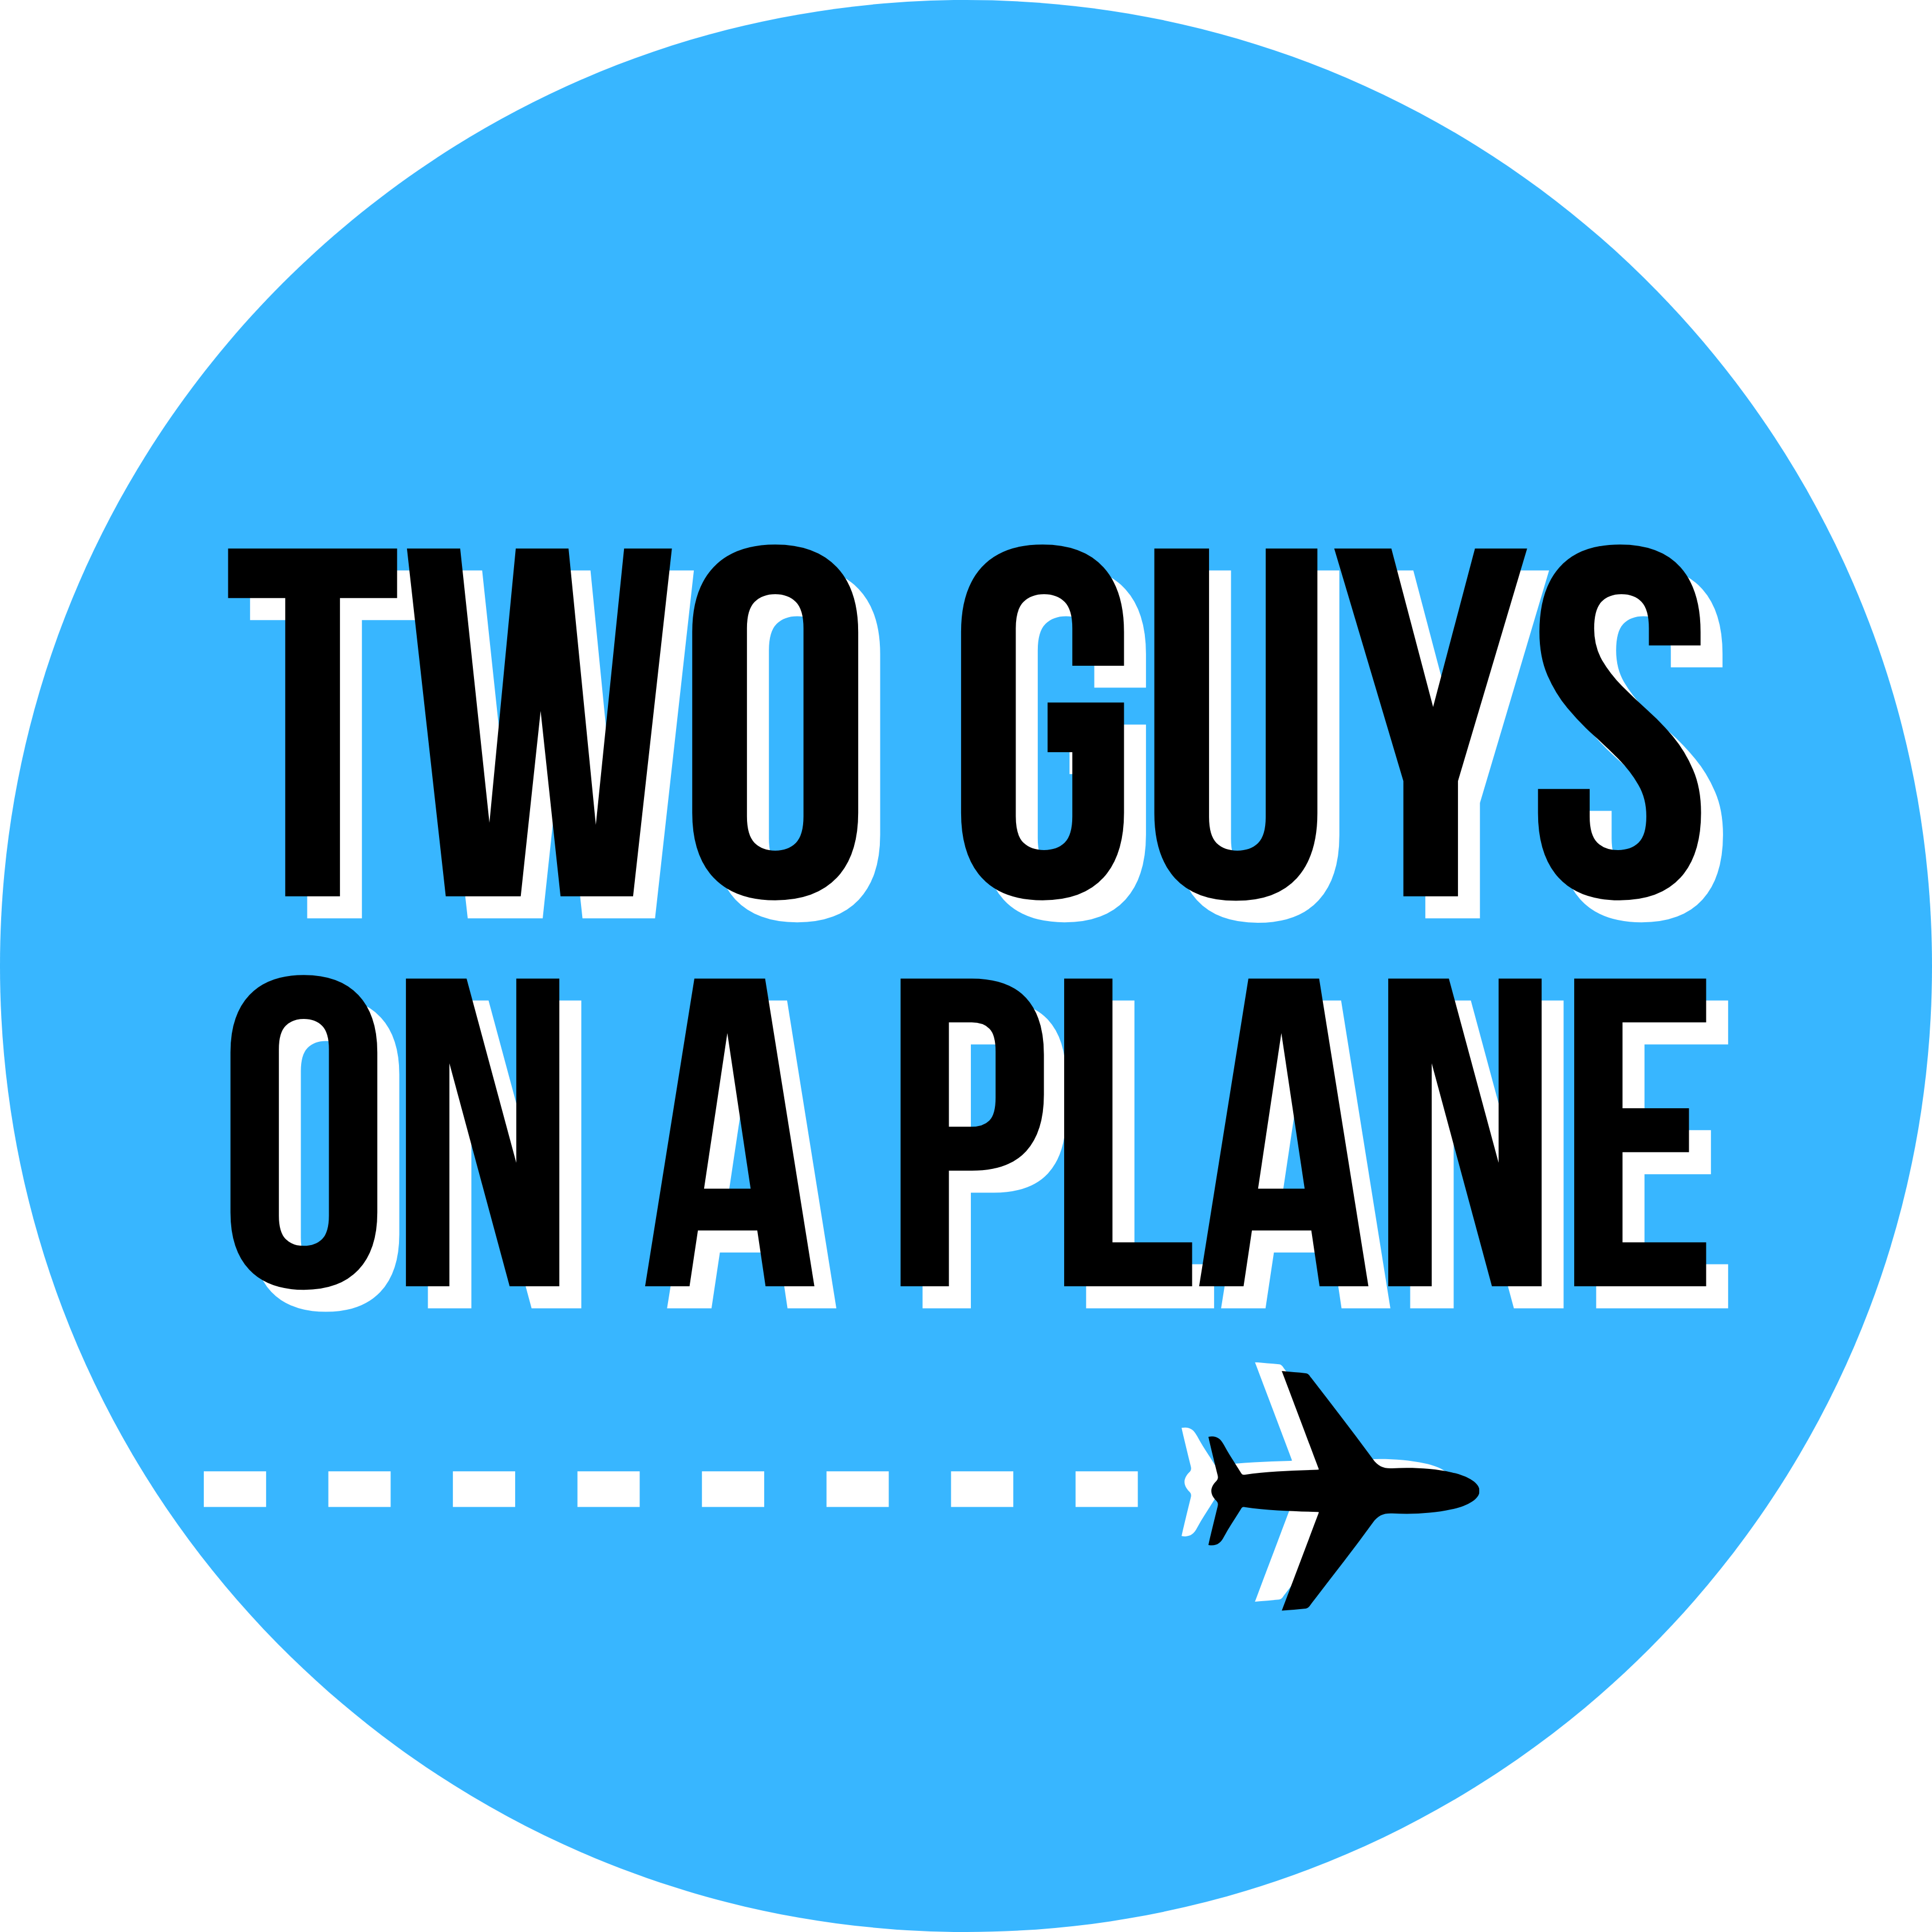 Two Guys on a Plane